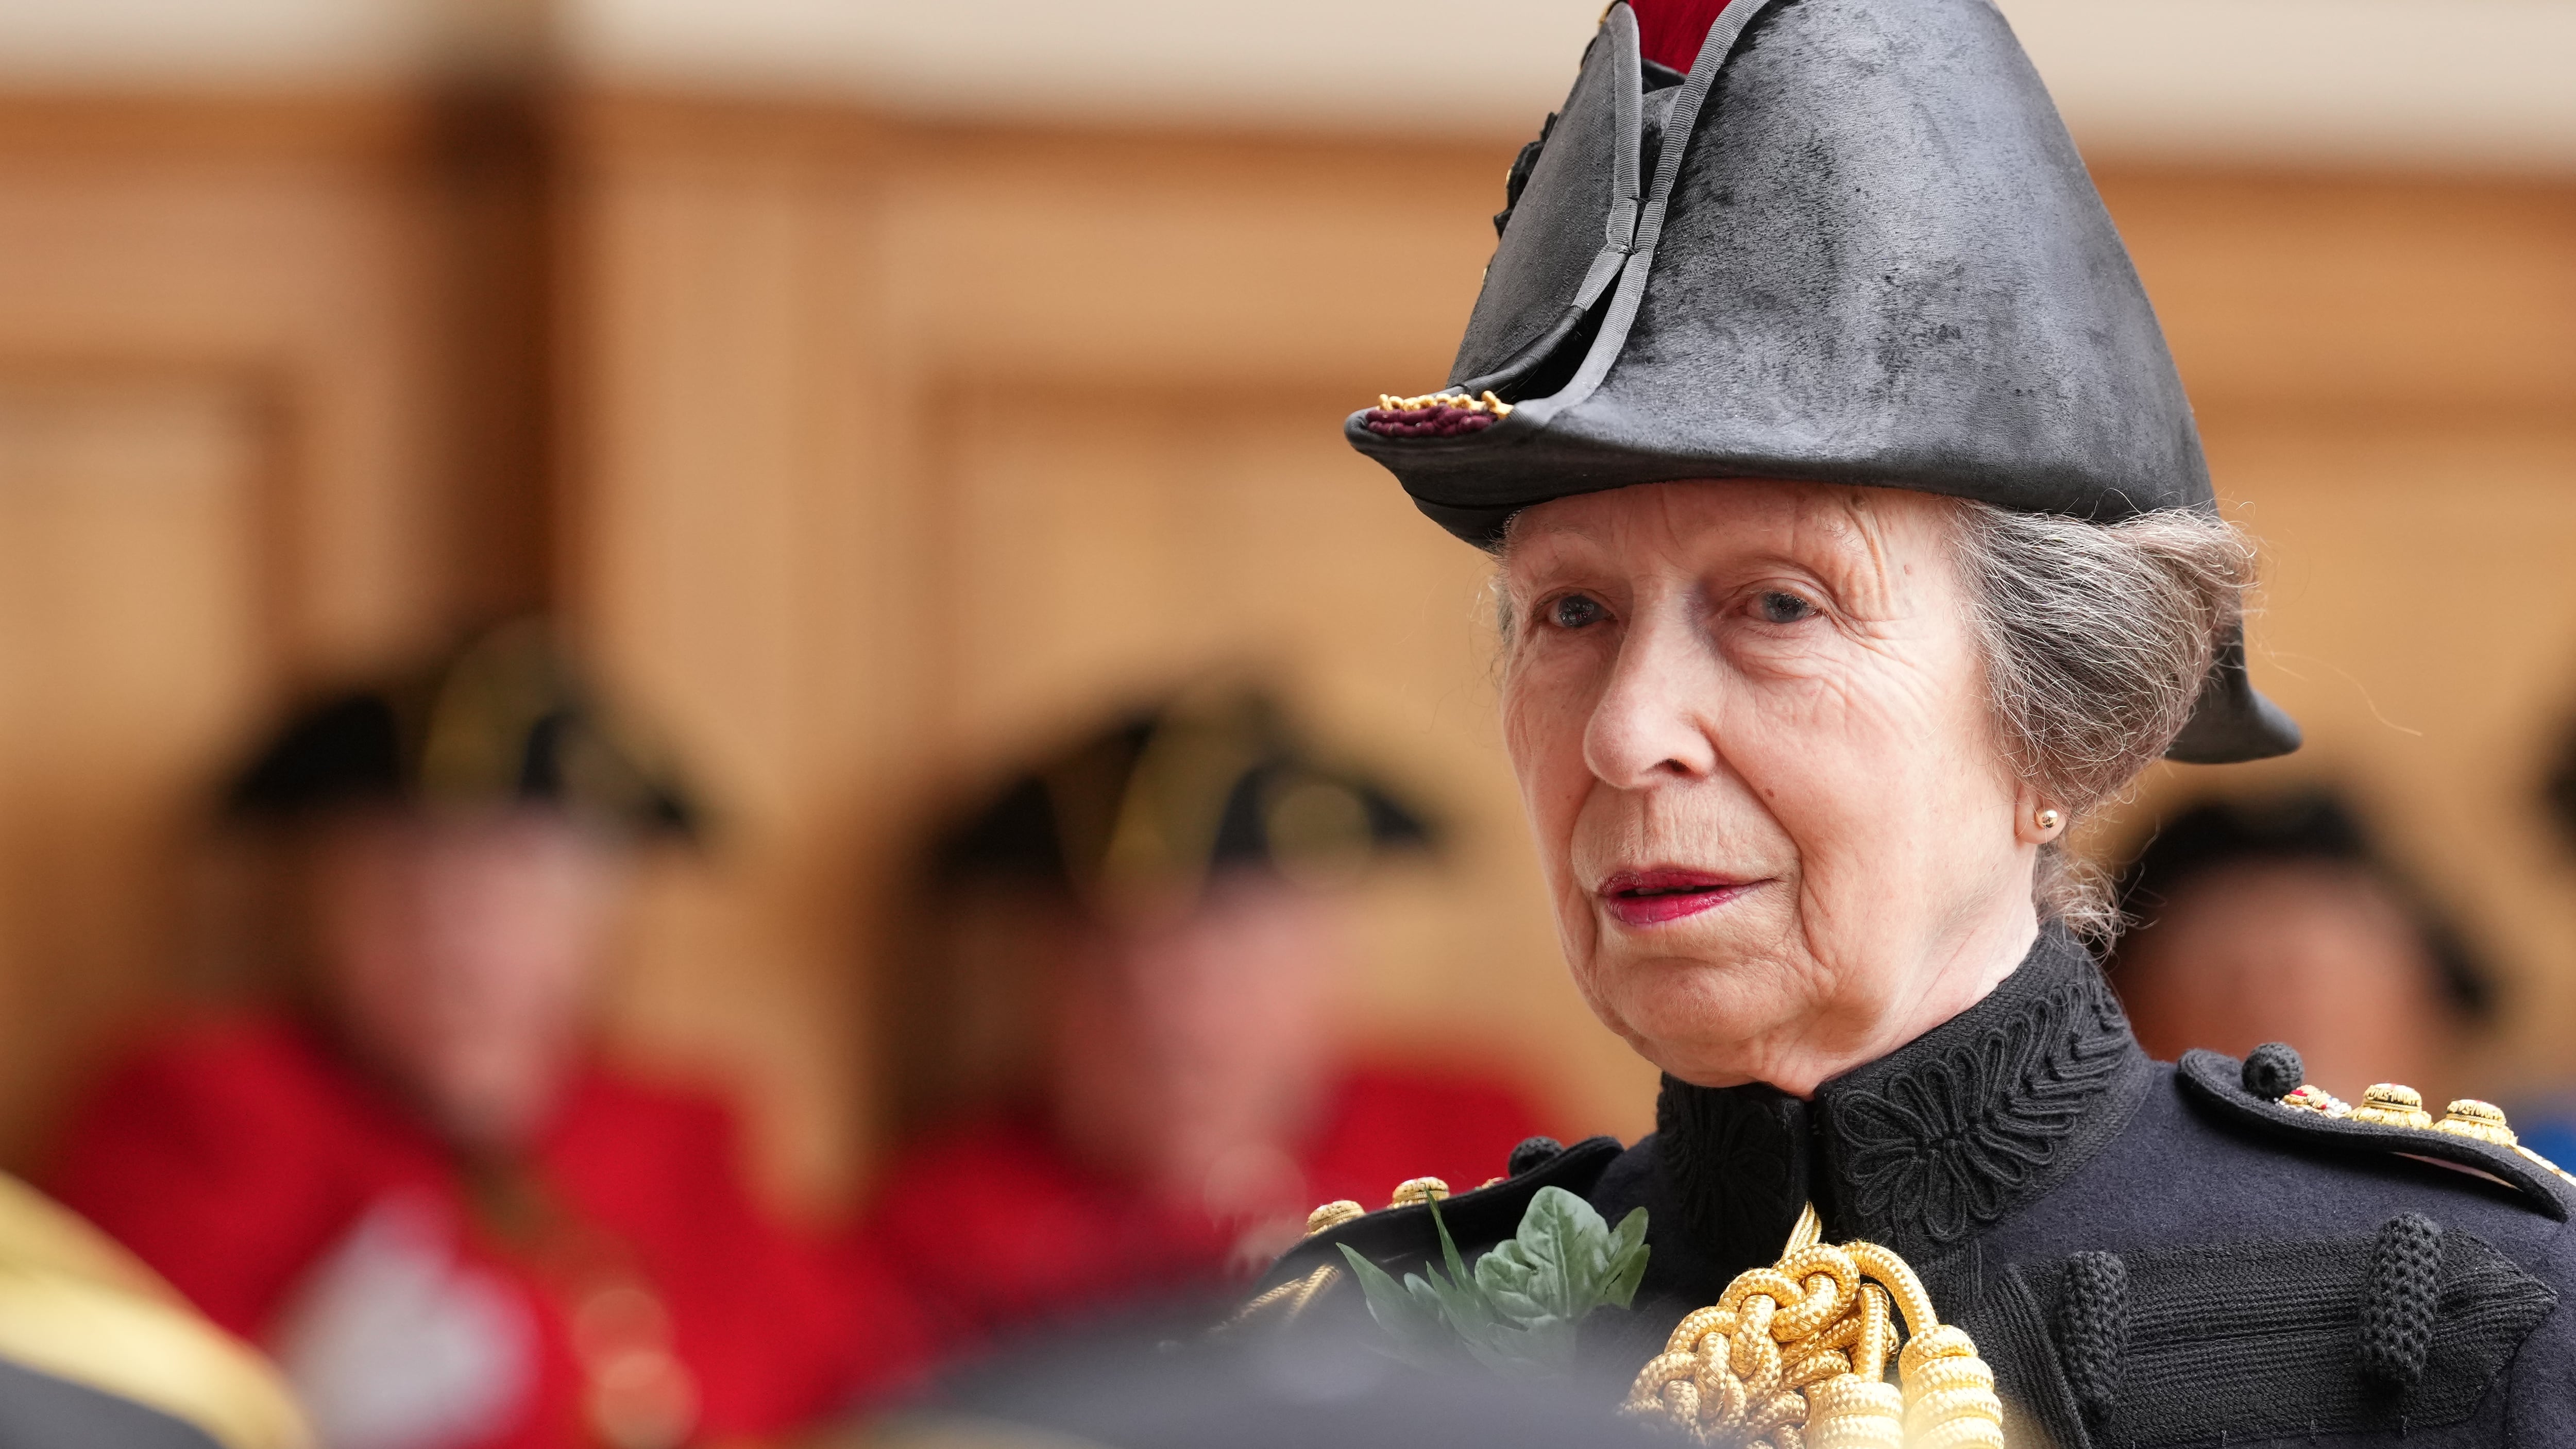 The Princess Royal was apparently hit by a horse’s head or legs